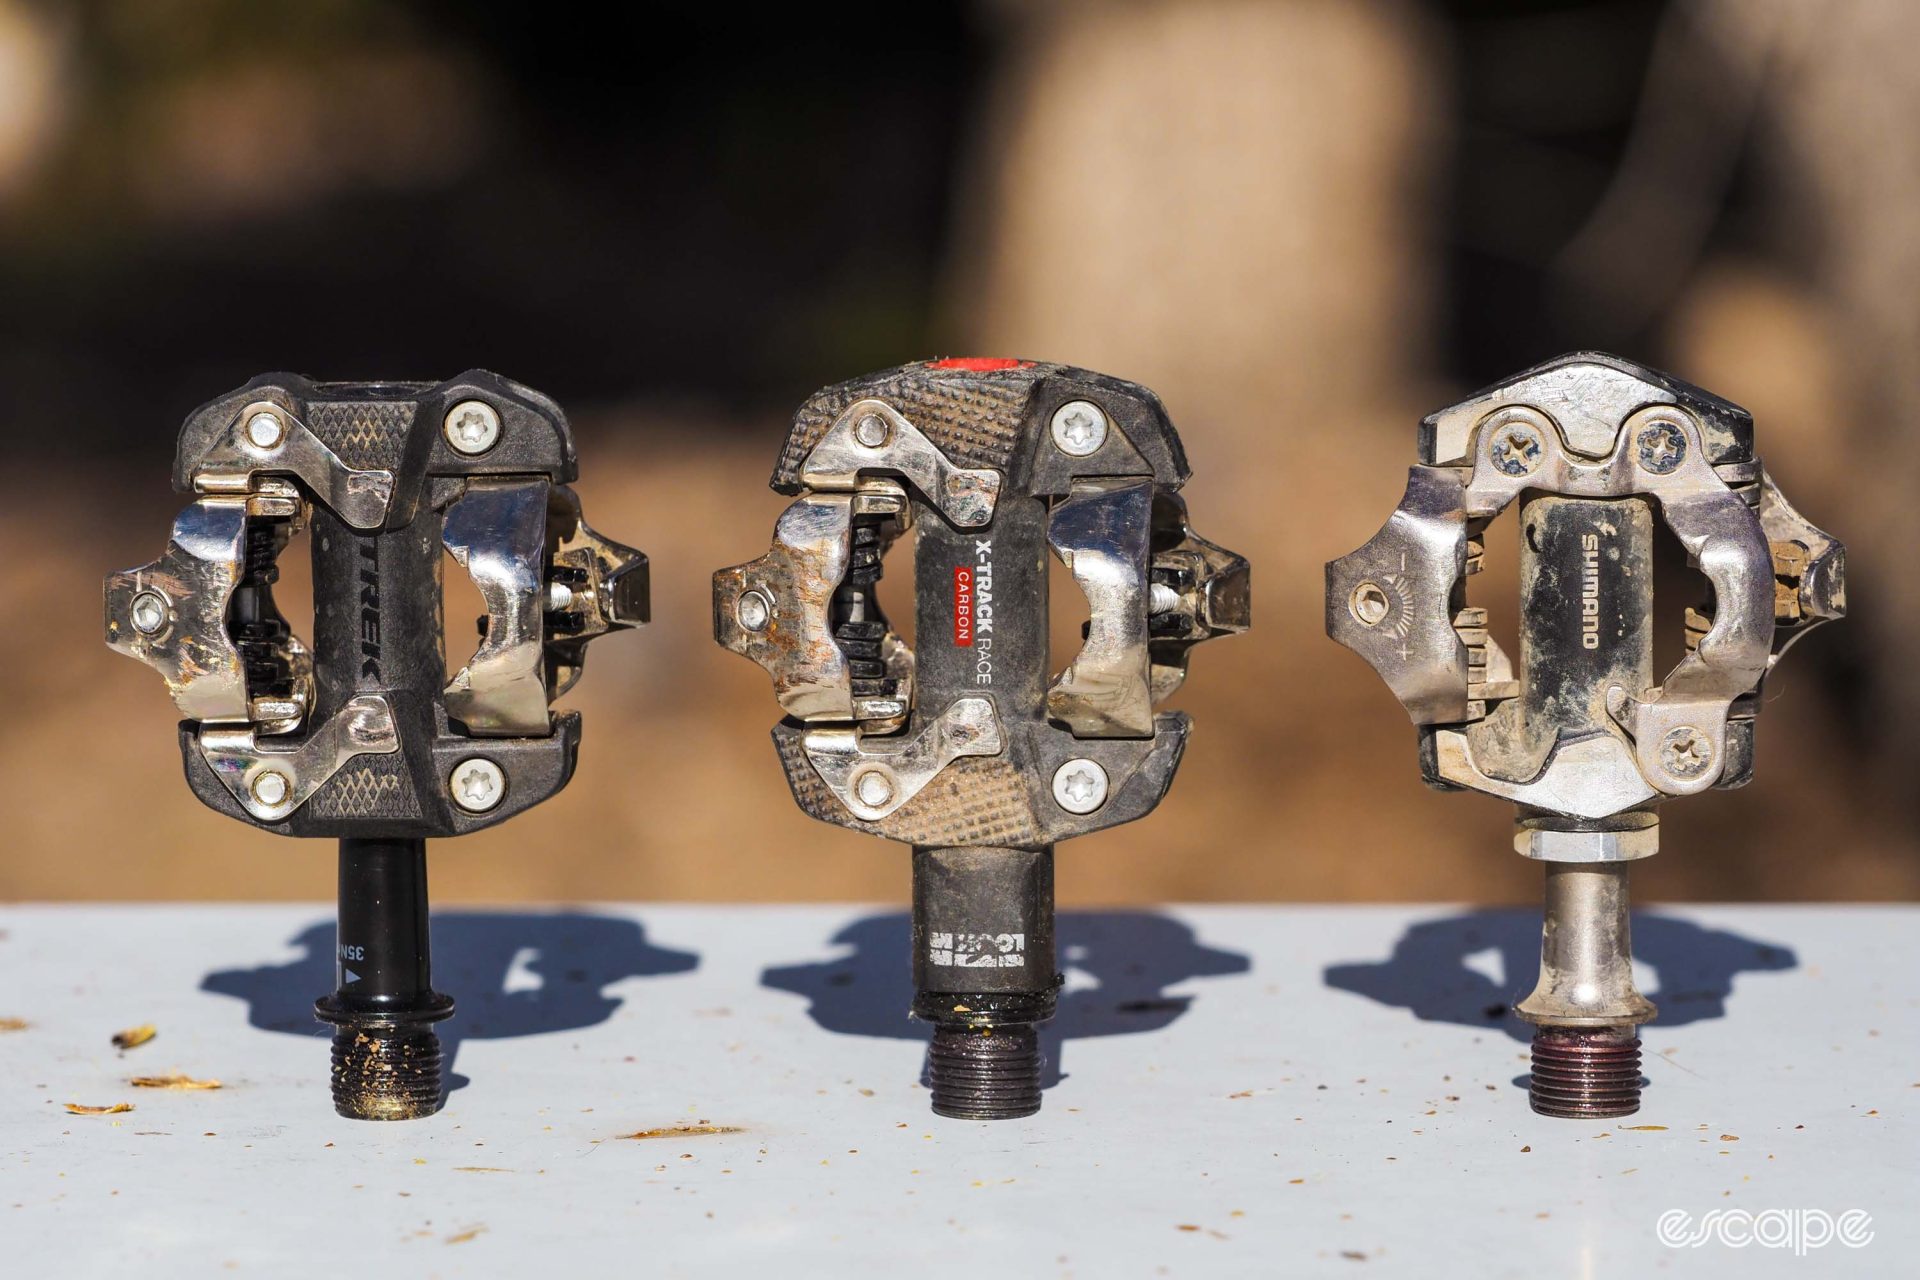 Trek Kovee Pro pedal compared to Look X-Track Race Carbon and Shimano Deore XT